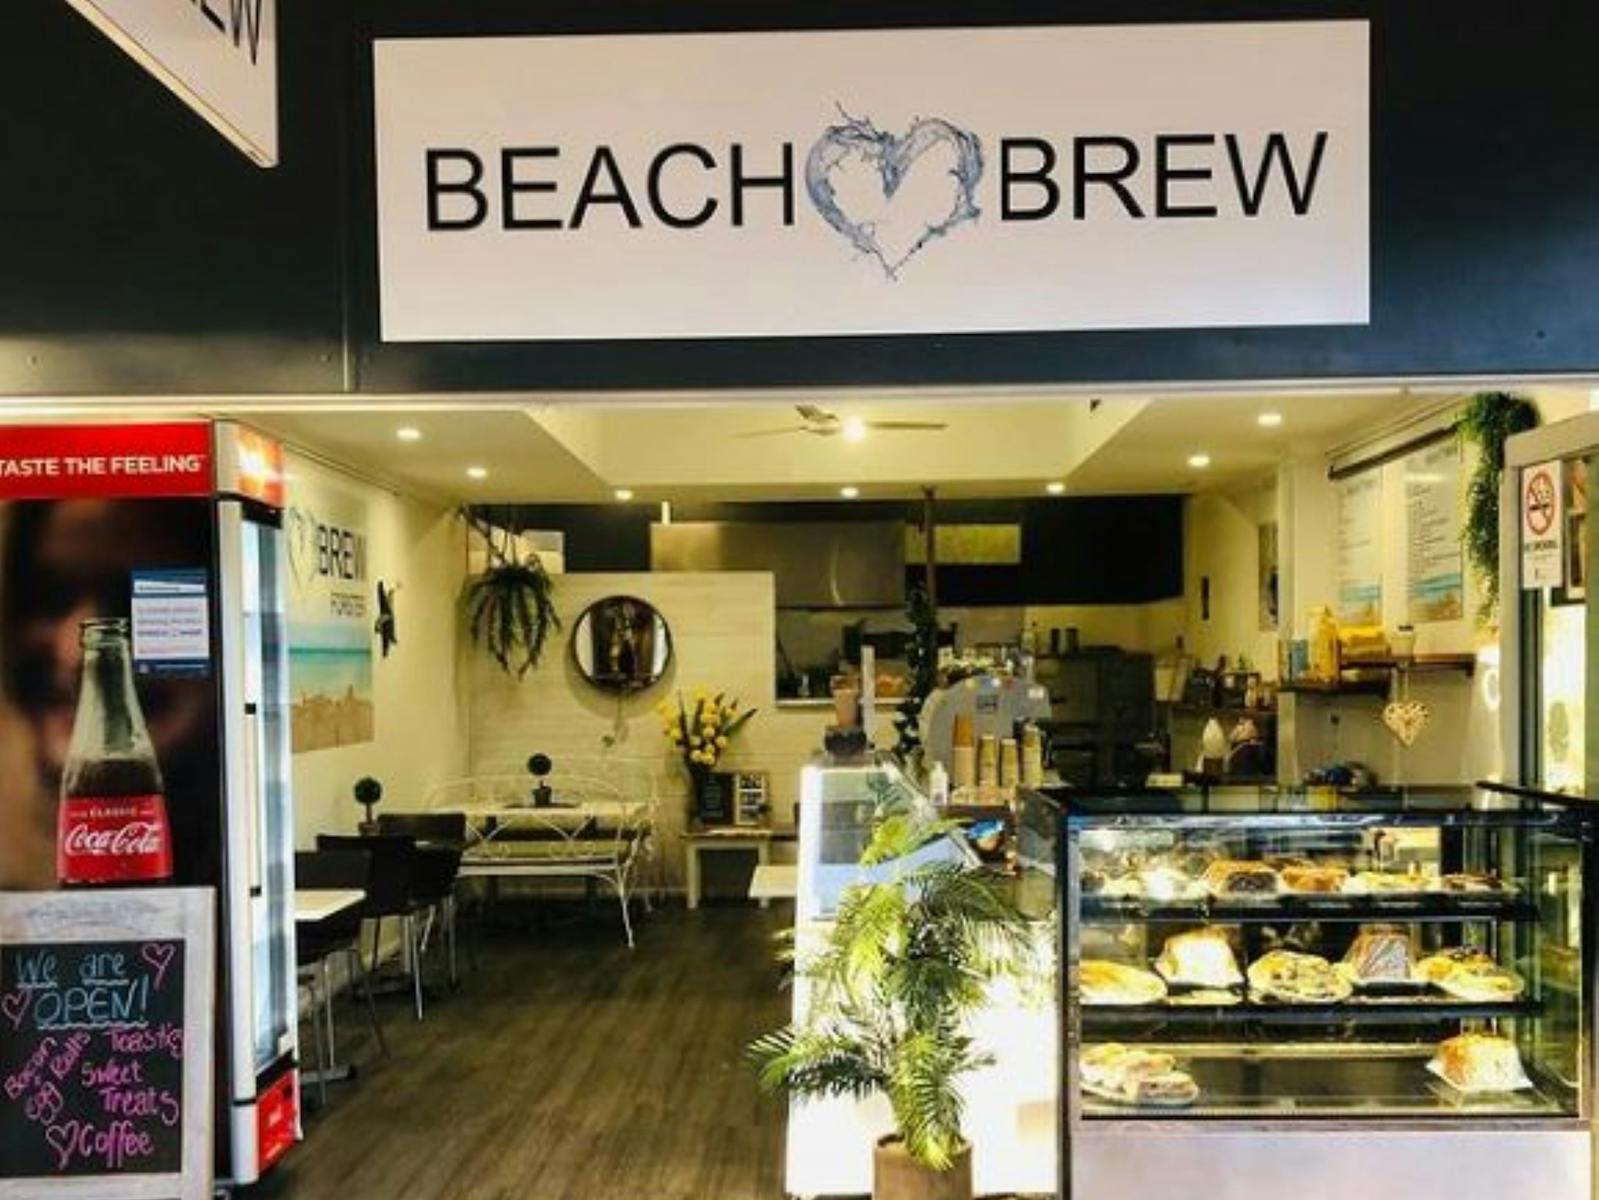 Beach Bums Cafe and Creamery